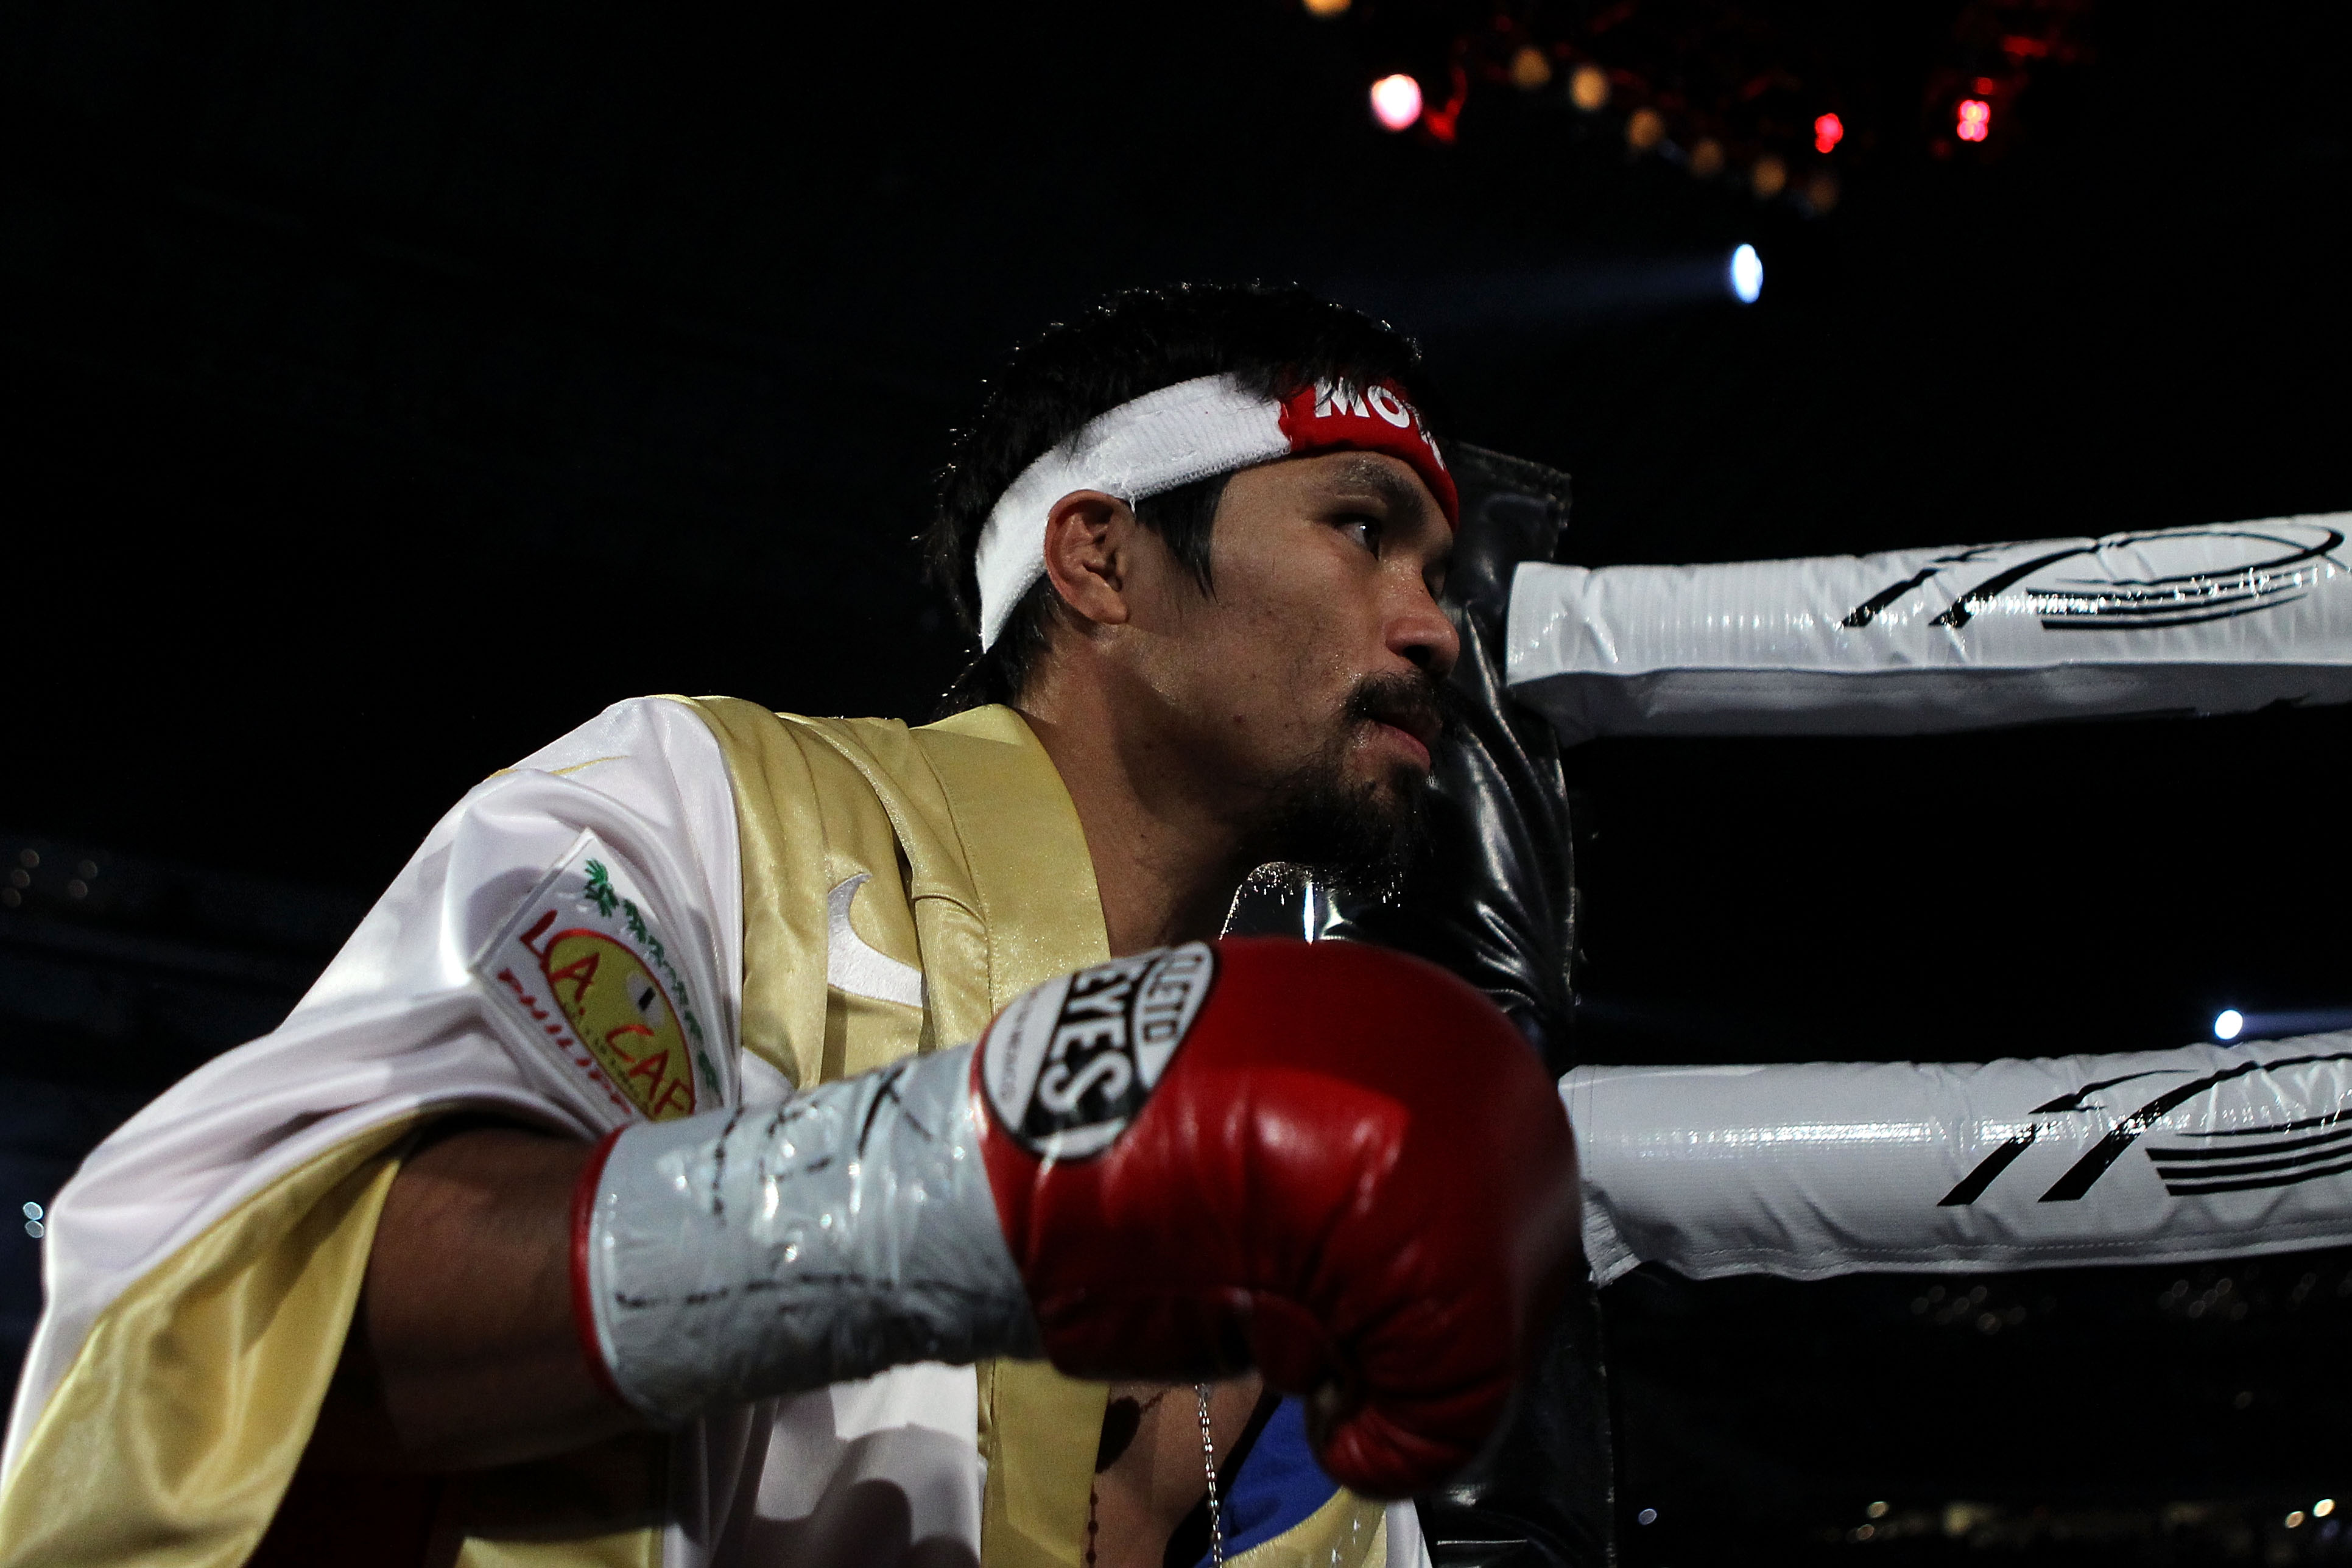 ARLINGTON, TX - NOVEMBER 13:  Manny Pacquiao of the Philippines makes his way to the ring for his fight against Antonio Margarito (black trunks) of Mexico during their WBC World Super Welterweight Title bout at Cowboys Stadium on November 13, 2010 in Arli